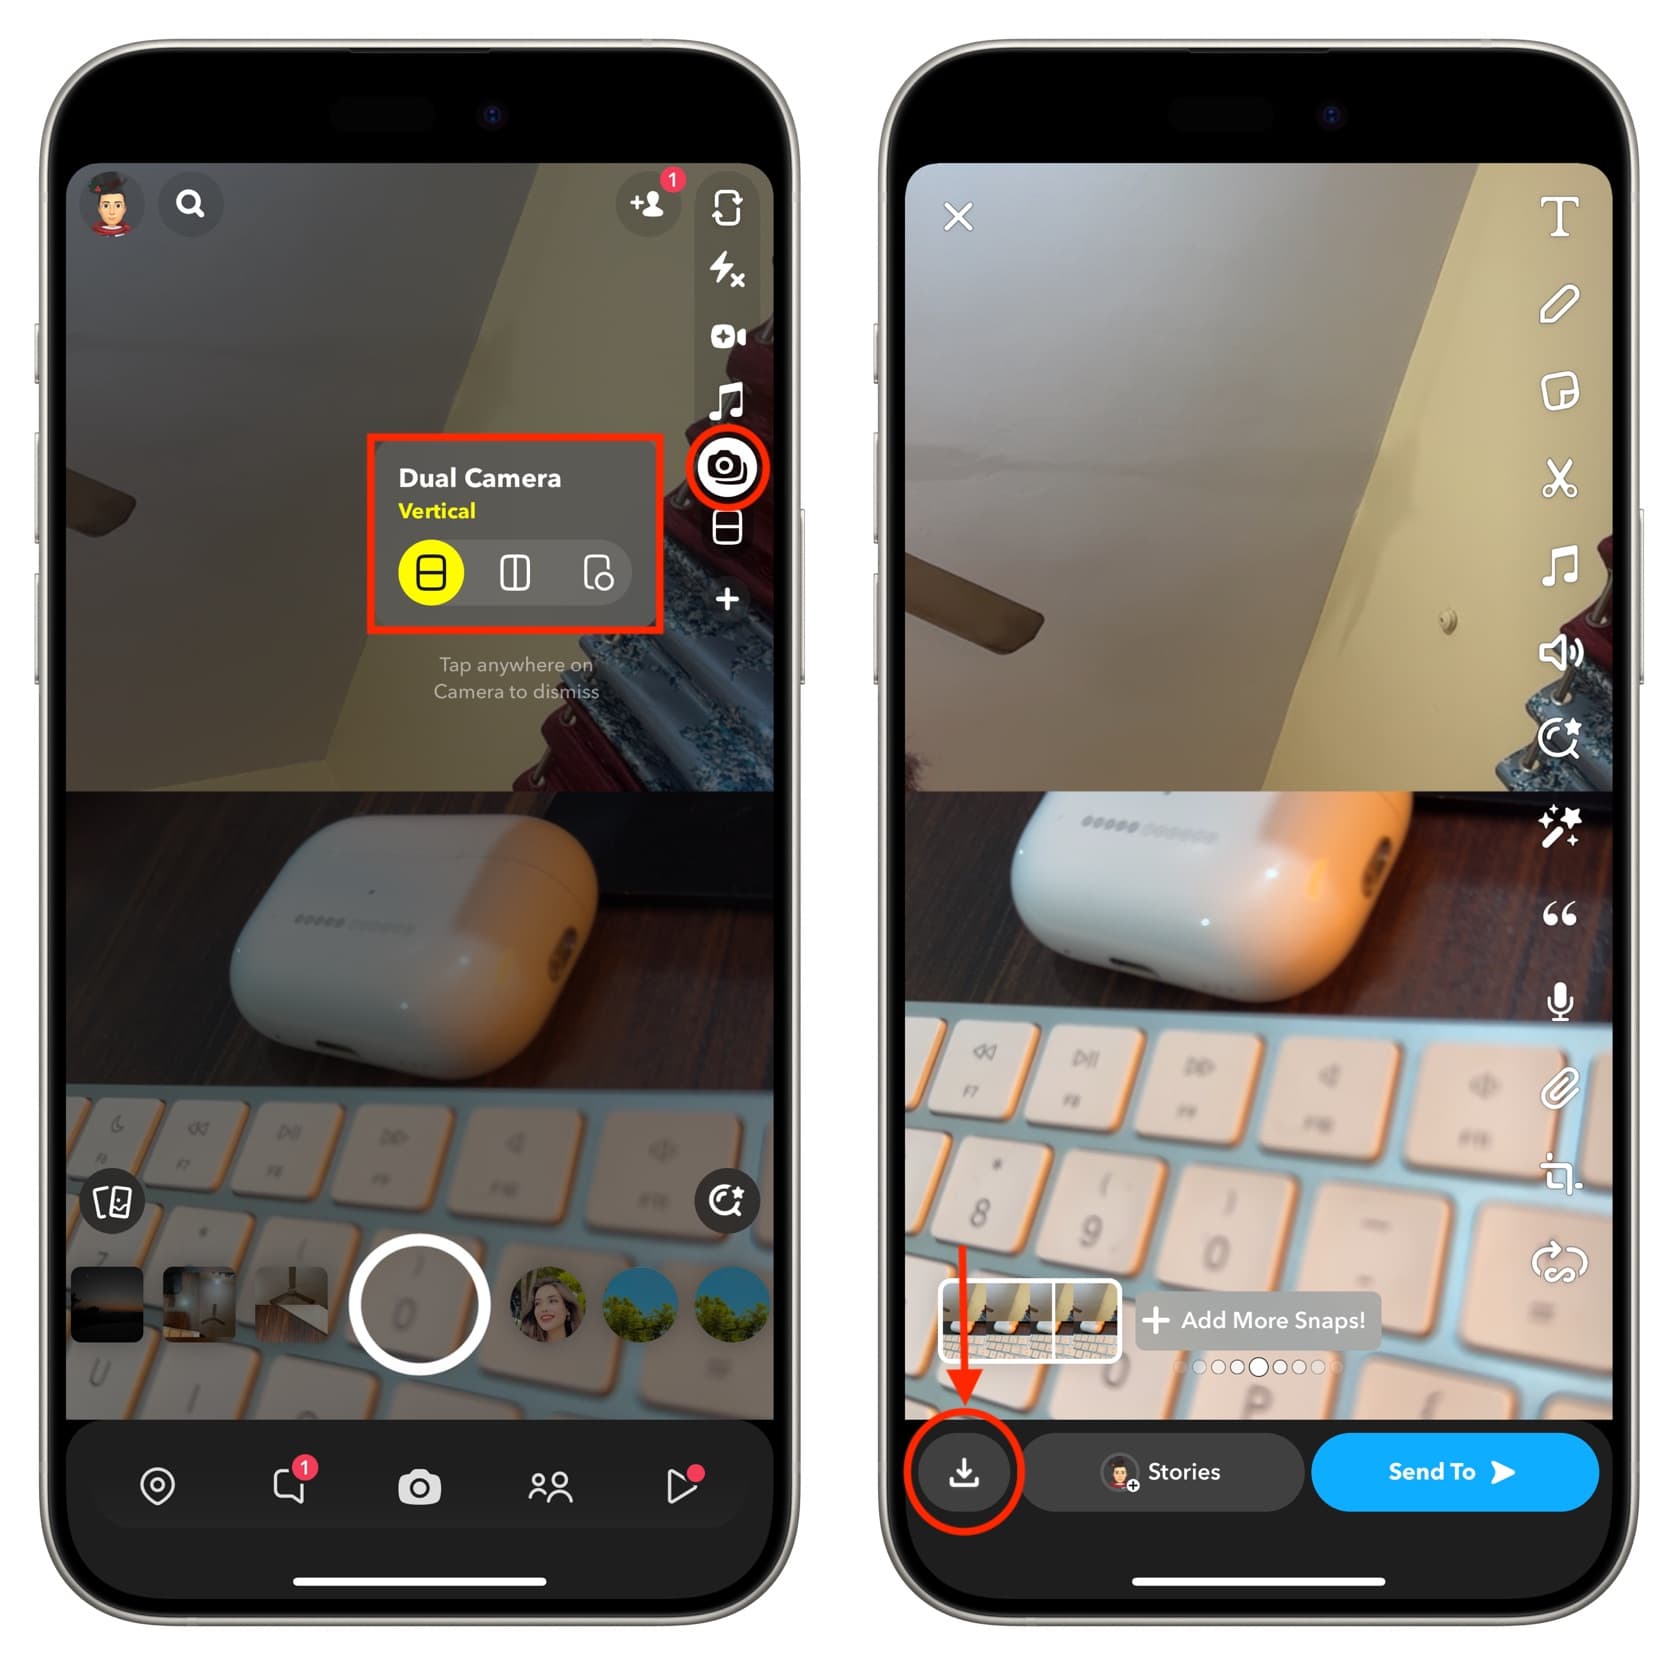 Recording in Dual Camera mode using Snapchat app on iPhone